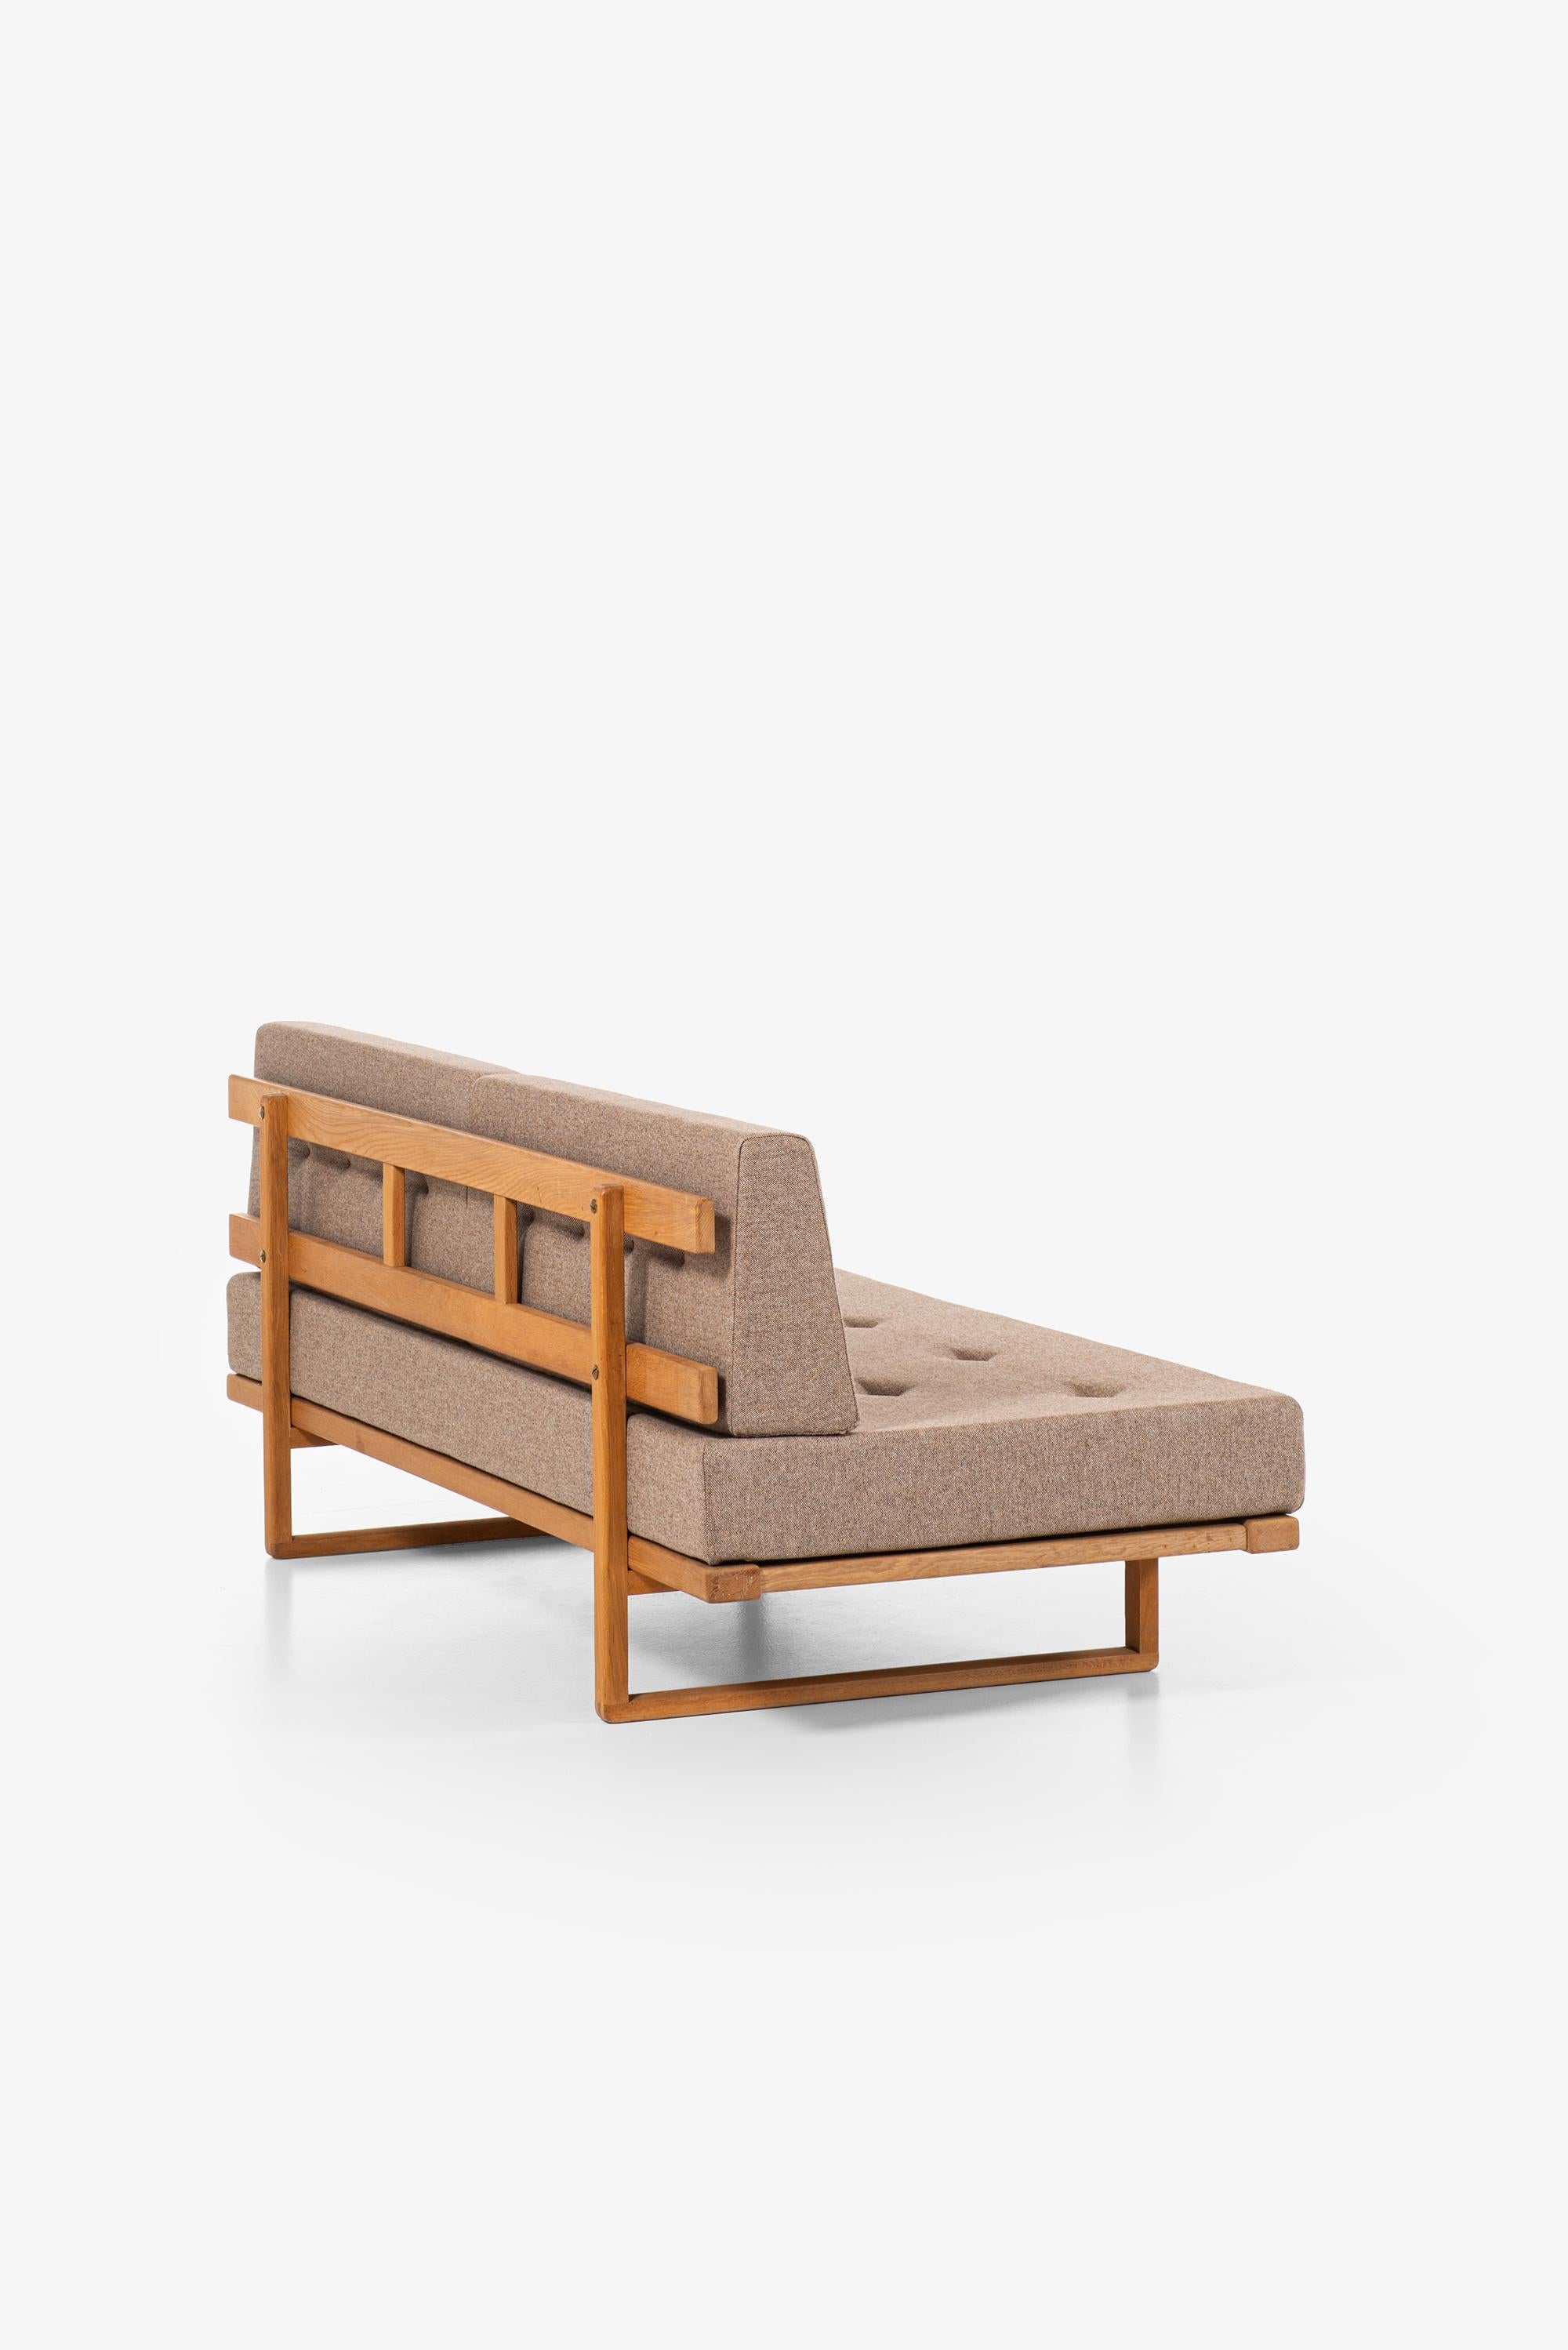 Mid-20th Century Børge Mogensen Sofa / Daybed Model 4311/4312 by Fredericia in Denmark For Sale